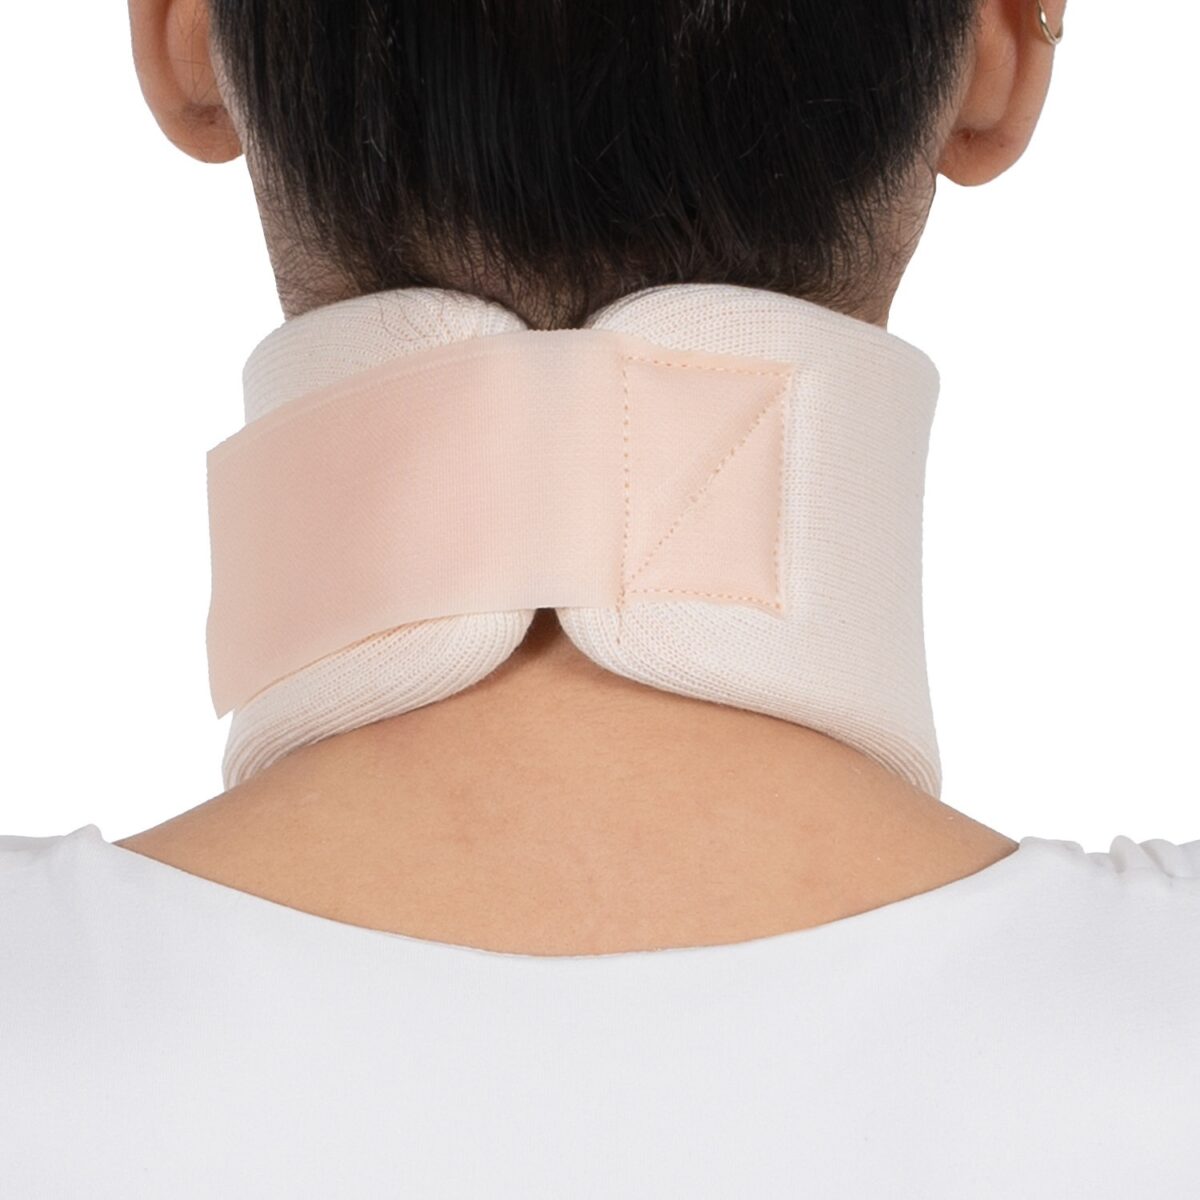 wingmed orthopedic equipments W104 nelson collar fabric coated product 3 1